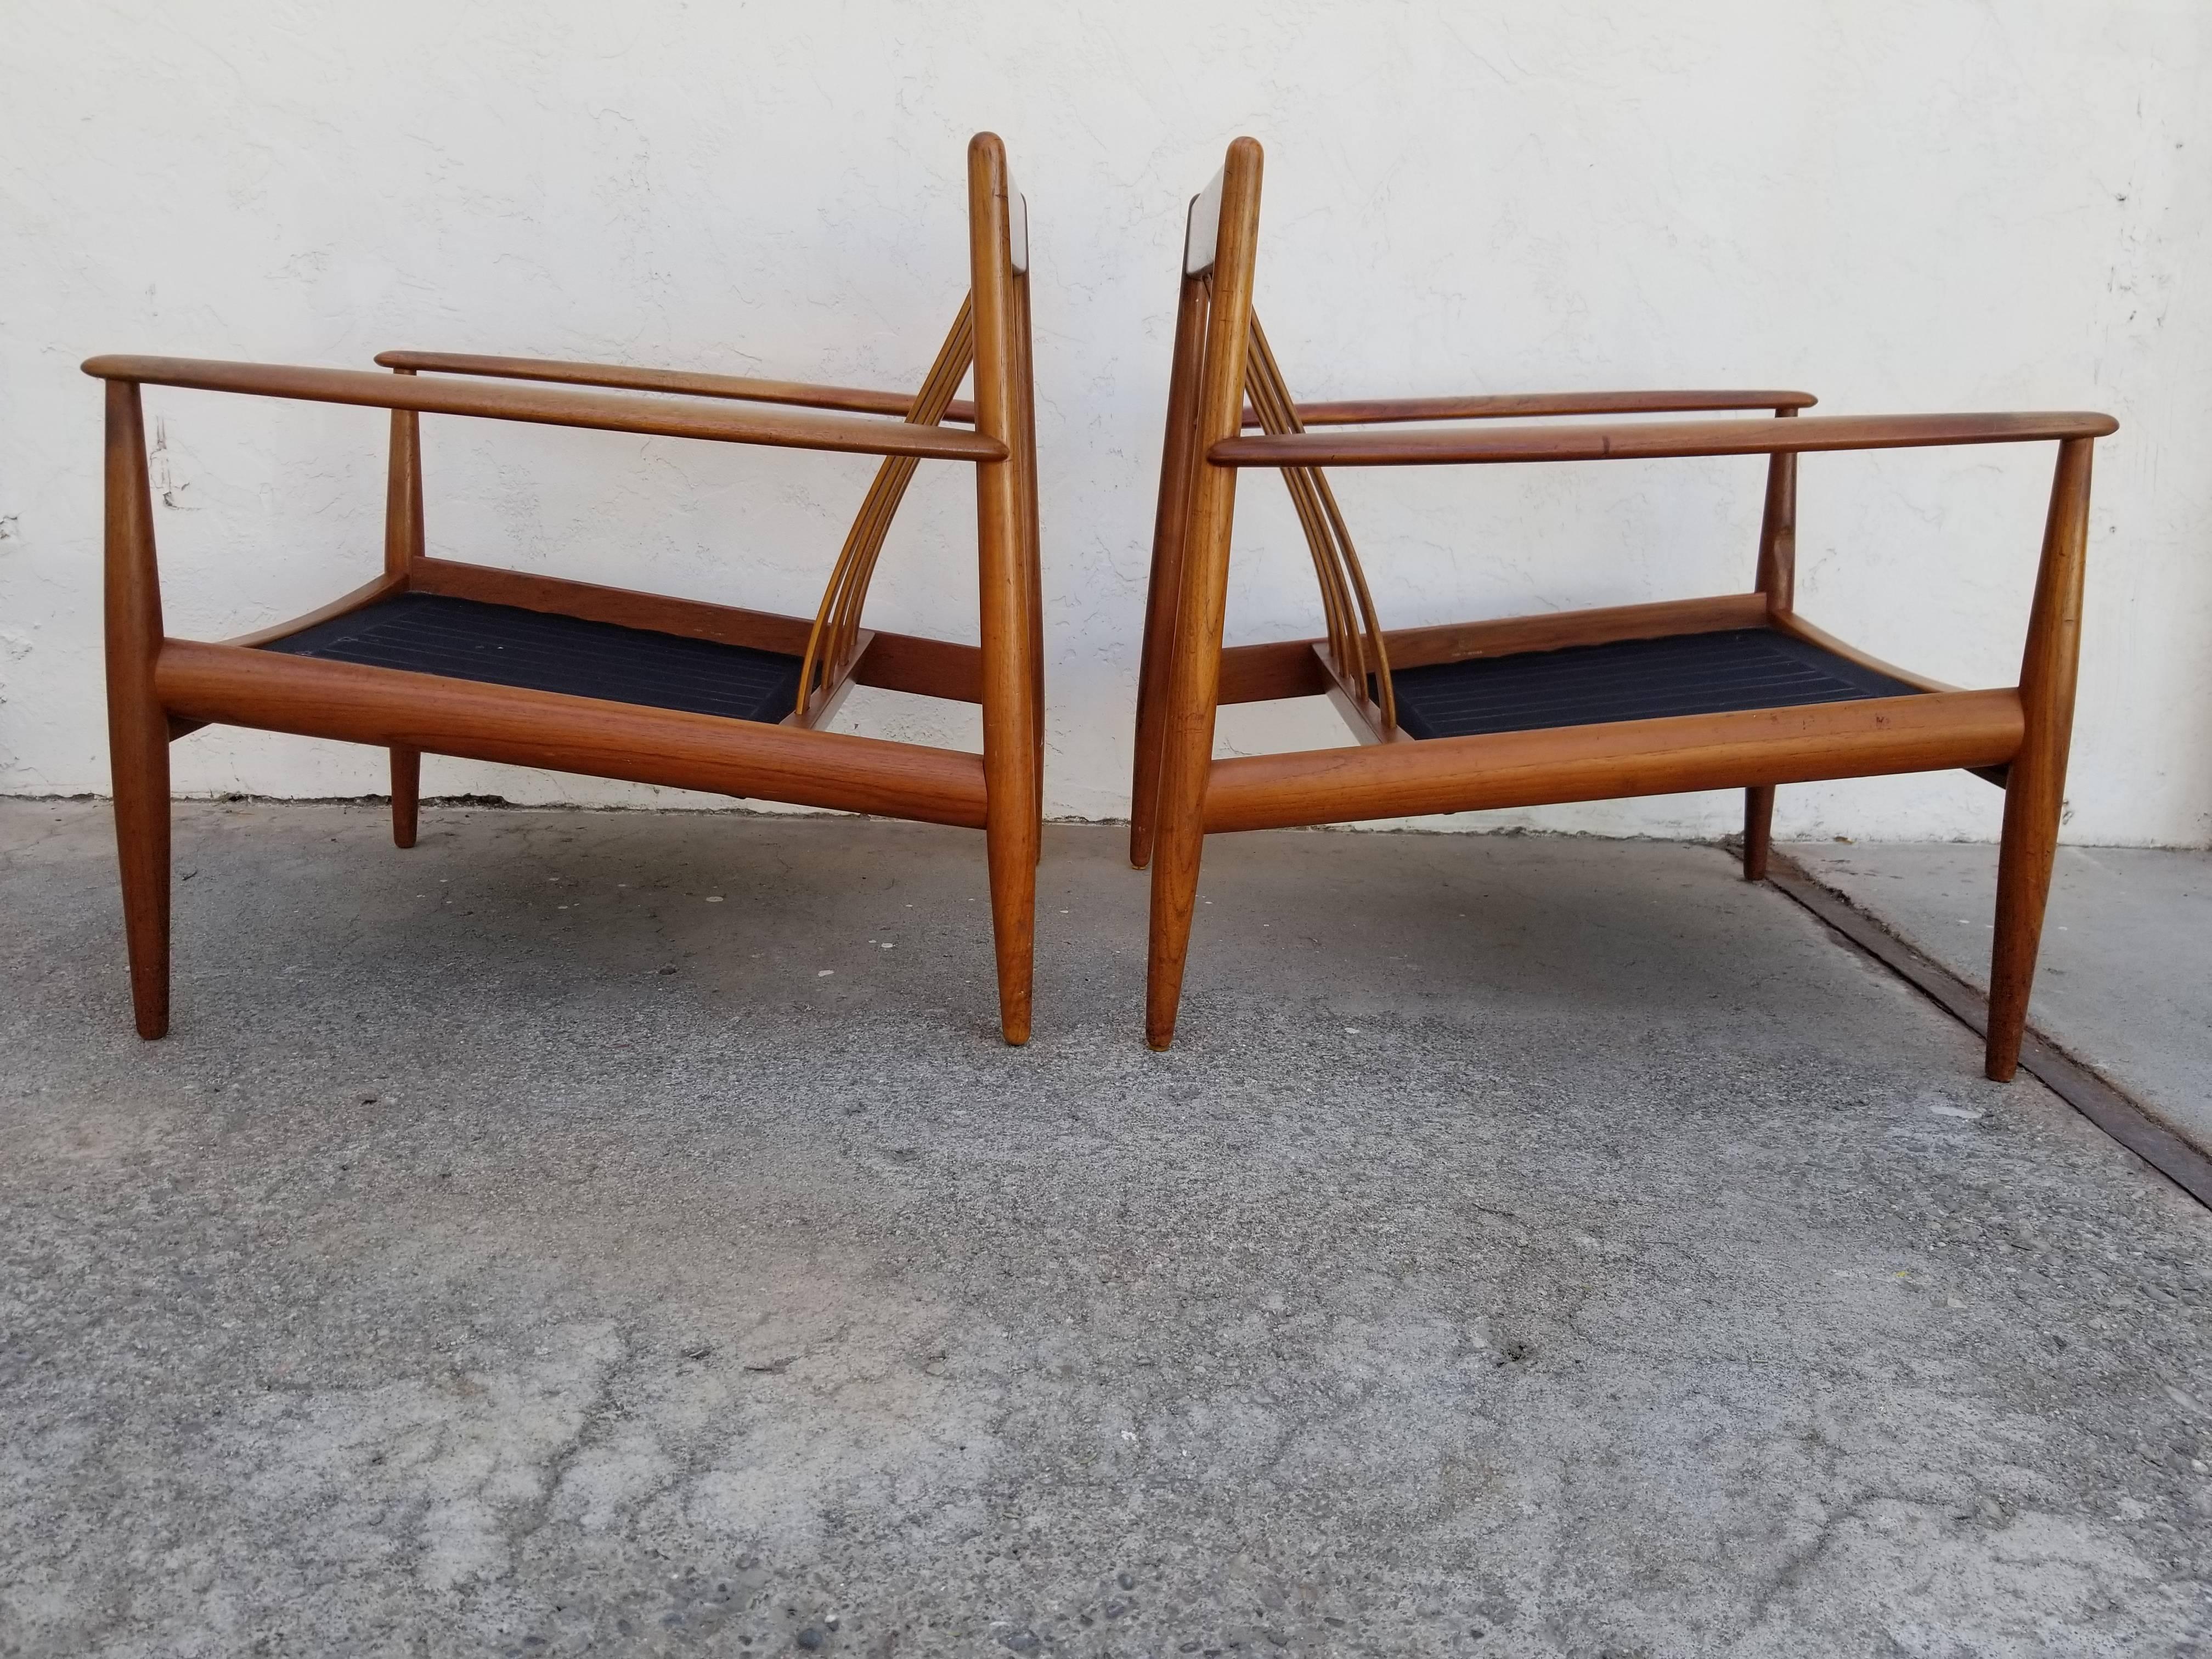 Early pair of Grete Jalk teak lounge chairs by France & Daverkosen, Denmark, circa. 1960. Both chairs retain their original makers marks. Original cushions intact, but have wear. Allows opportunity to re-upholster in fabric of your choice while